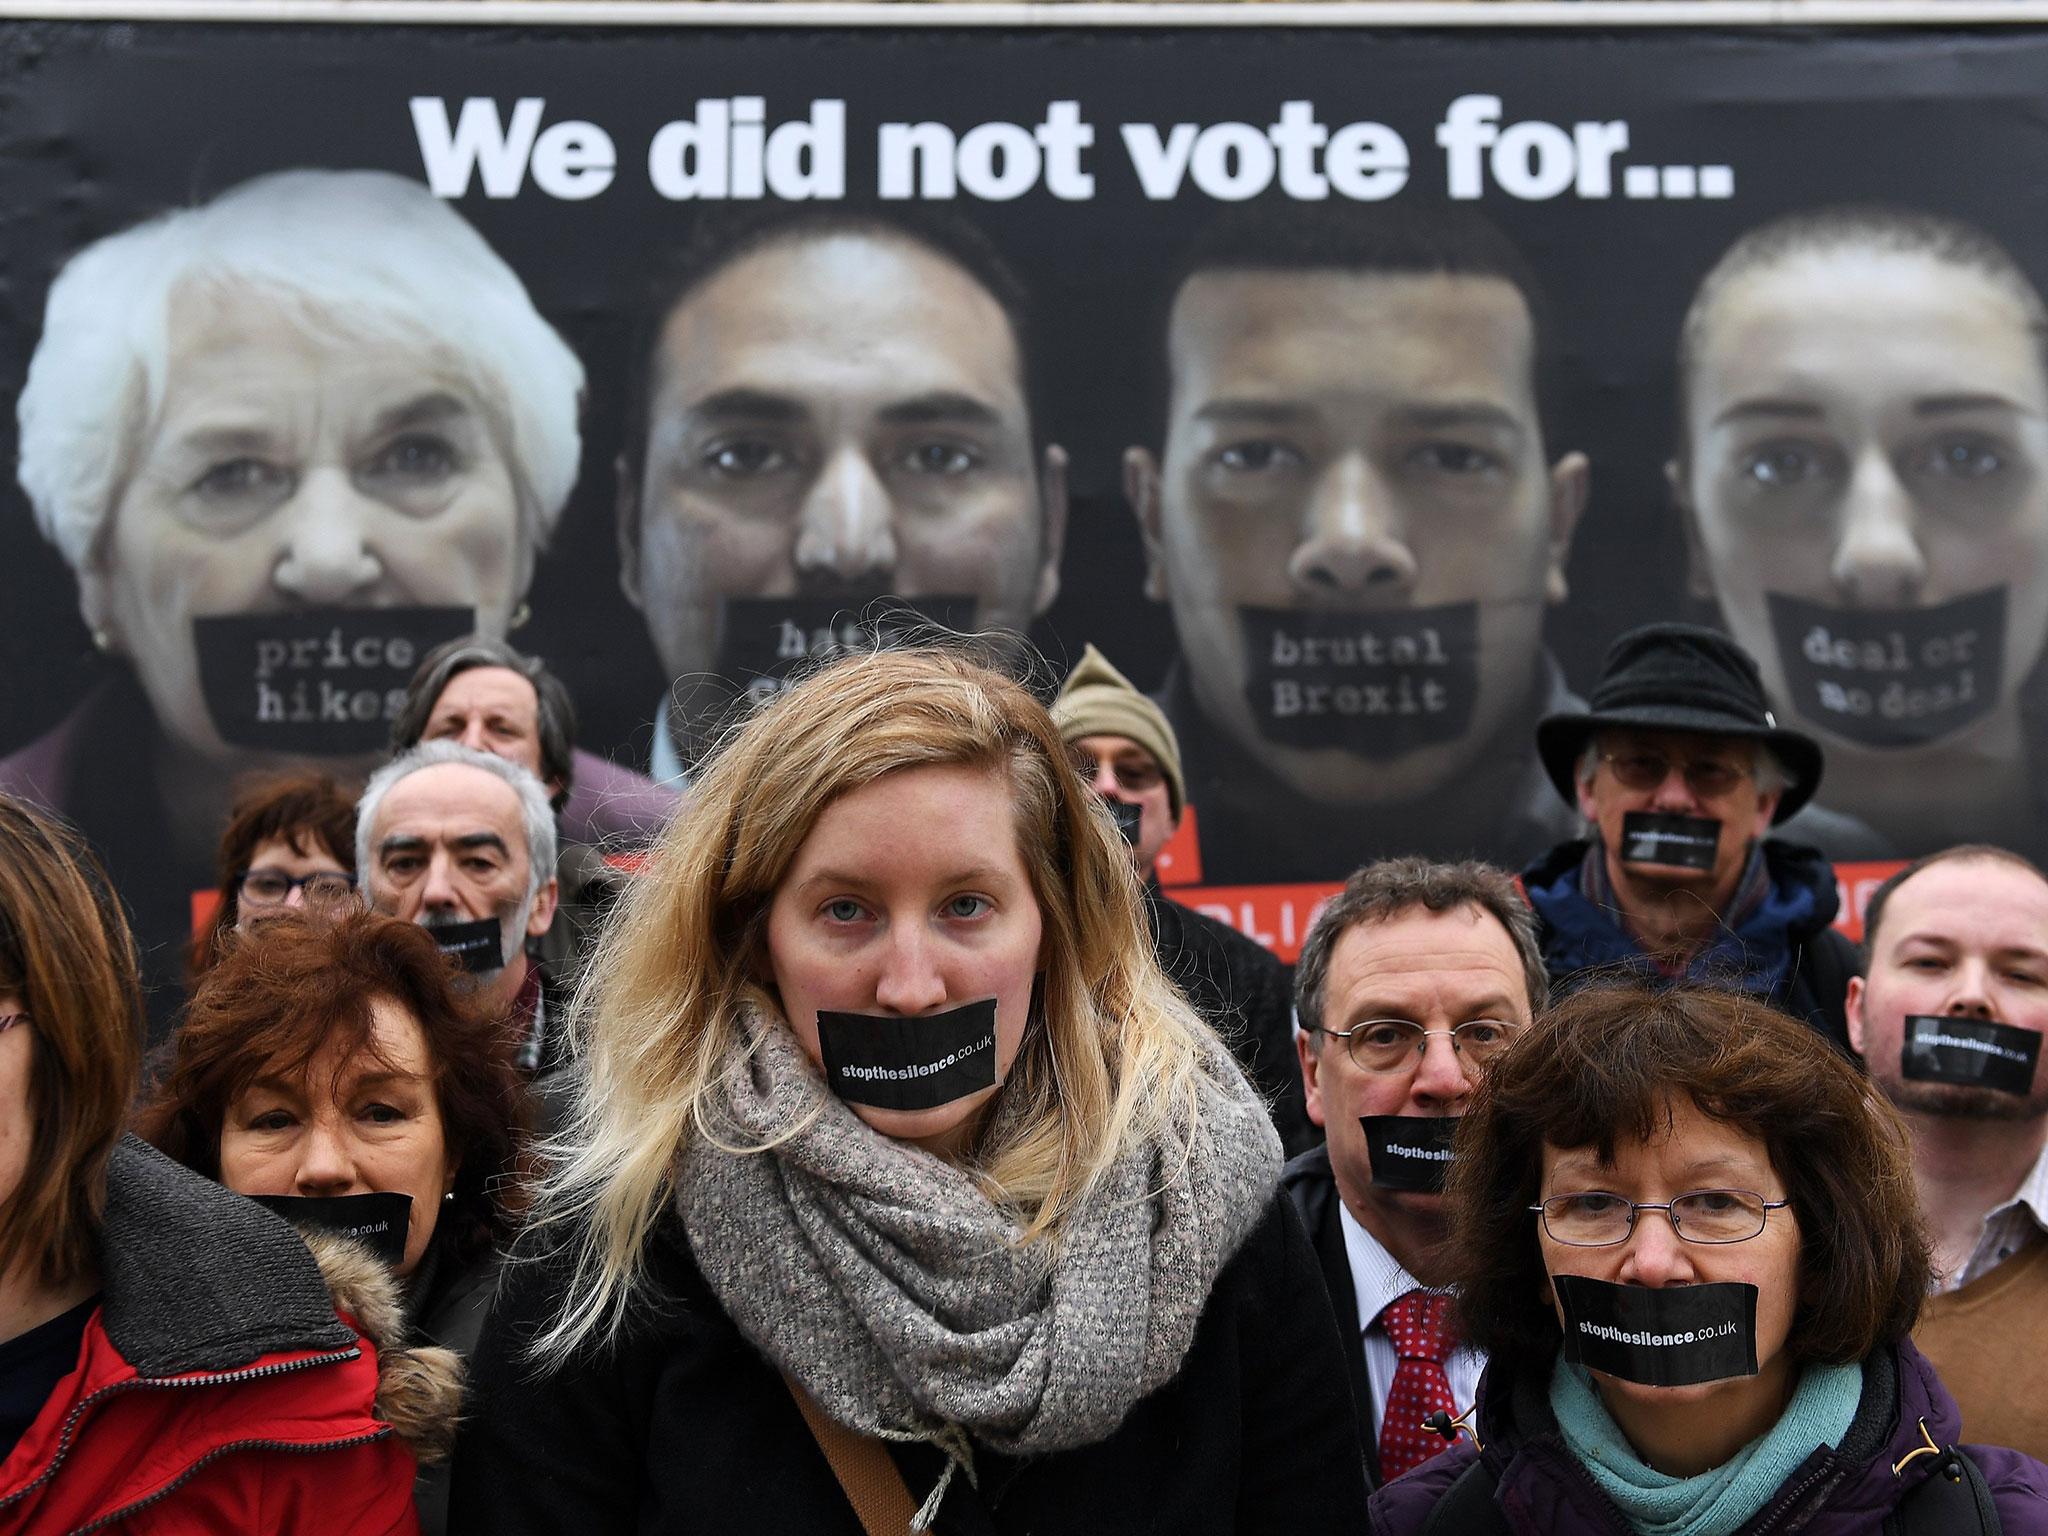 Stop the Silence campaigners launch a nationwide poster campaign outside Parliament calling for the Lords to make amendments to the Article 50 bill and for the public to speak out over the governments hard Brexit policy